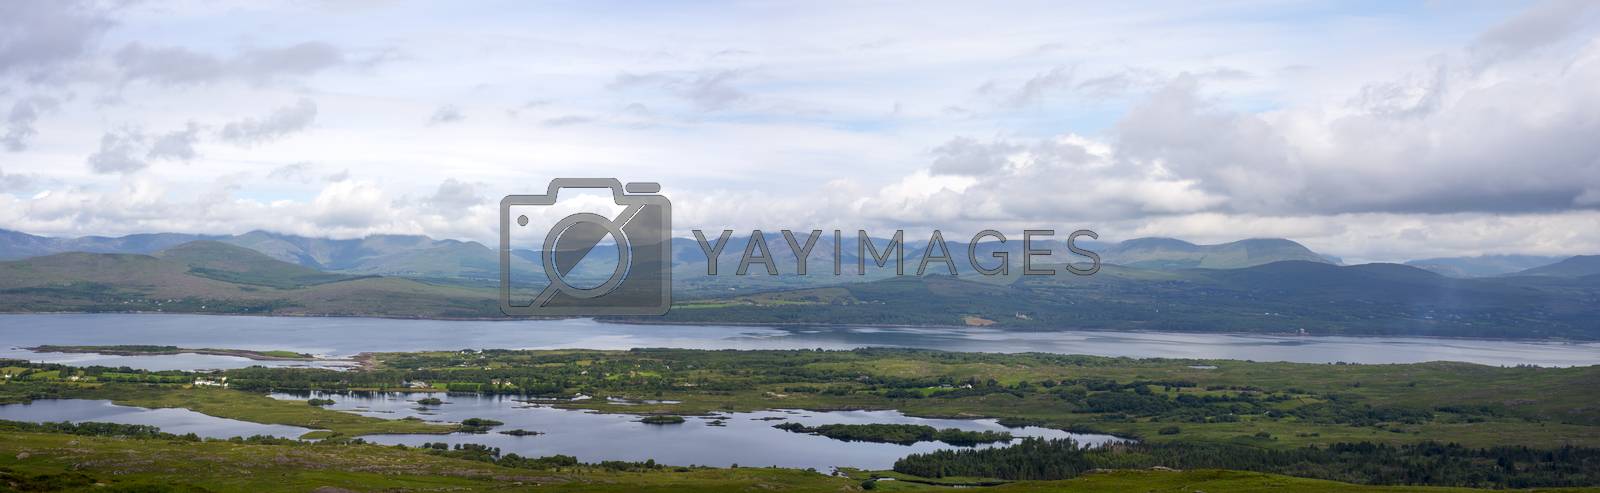 Royalty free image of beautiful panorama from the kerry way by morrbyte